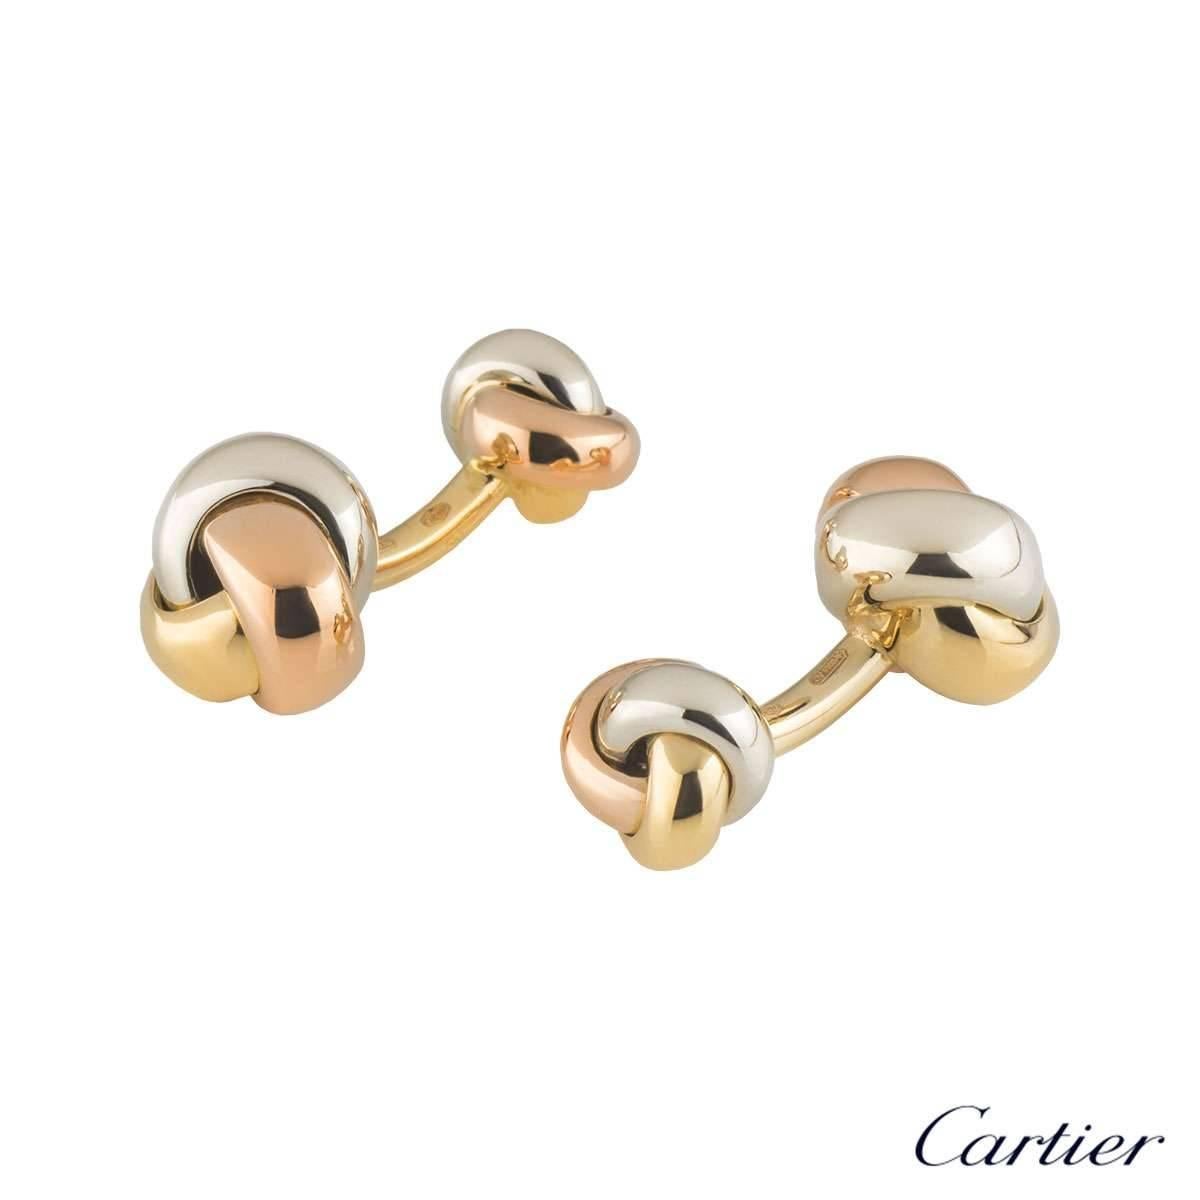 A classic pair of 18k tri-colour gold Cartier Trinity cufflinks. The cufflinks are composed of a white, yellow and rose gold band interwoven into a large knot leading to a smaller knot. The large knot measures 11.5mm in diameter and the smaller knot